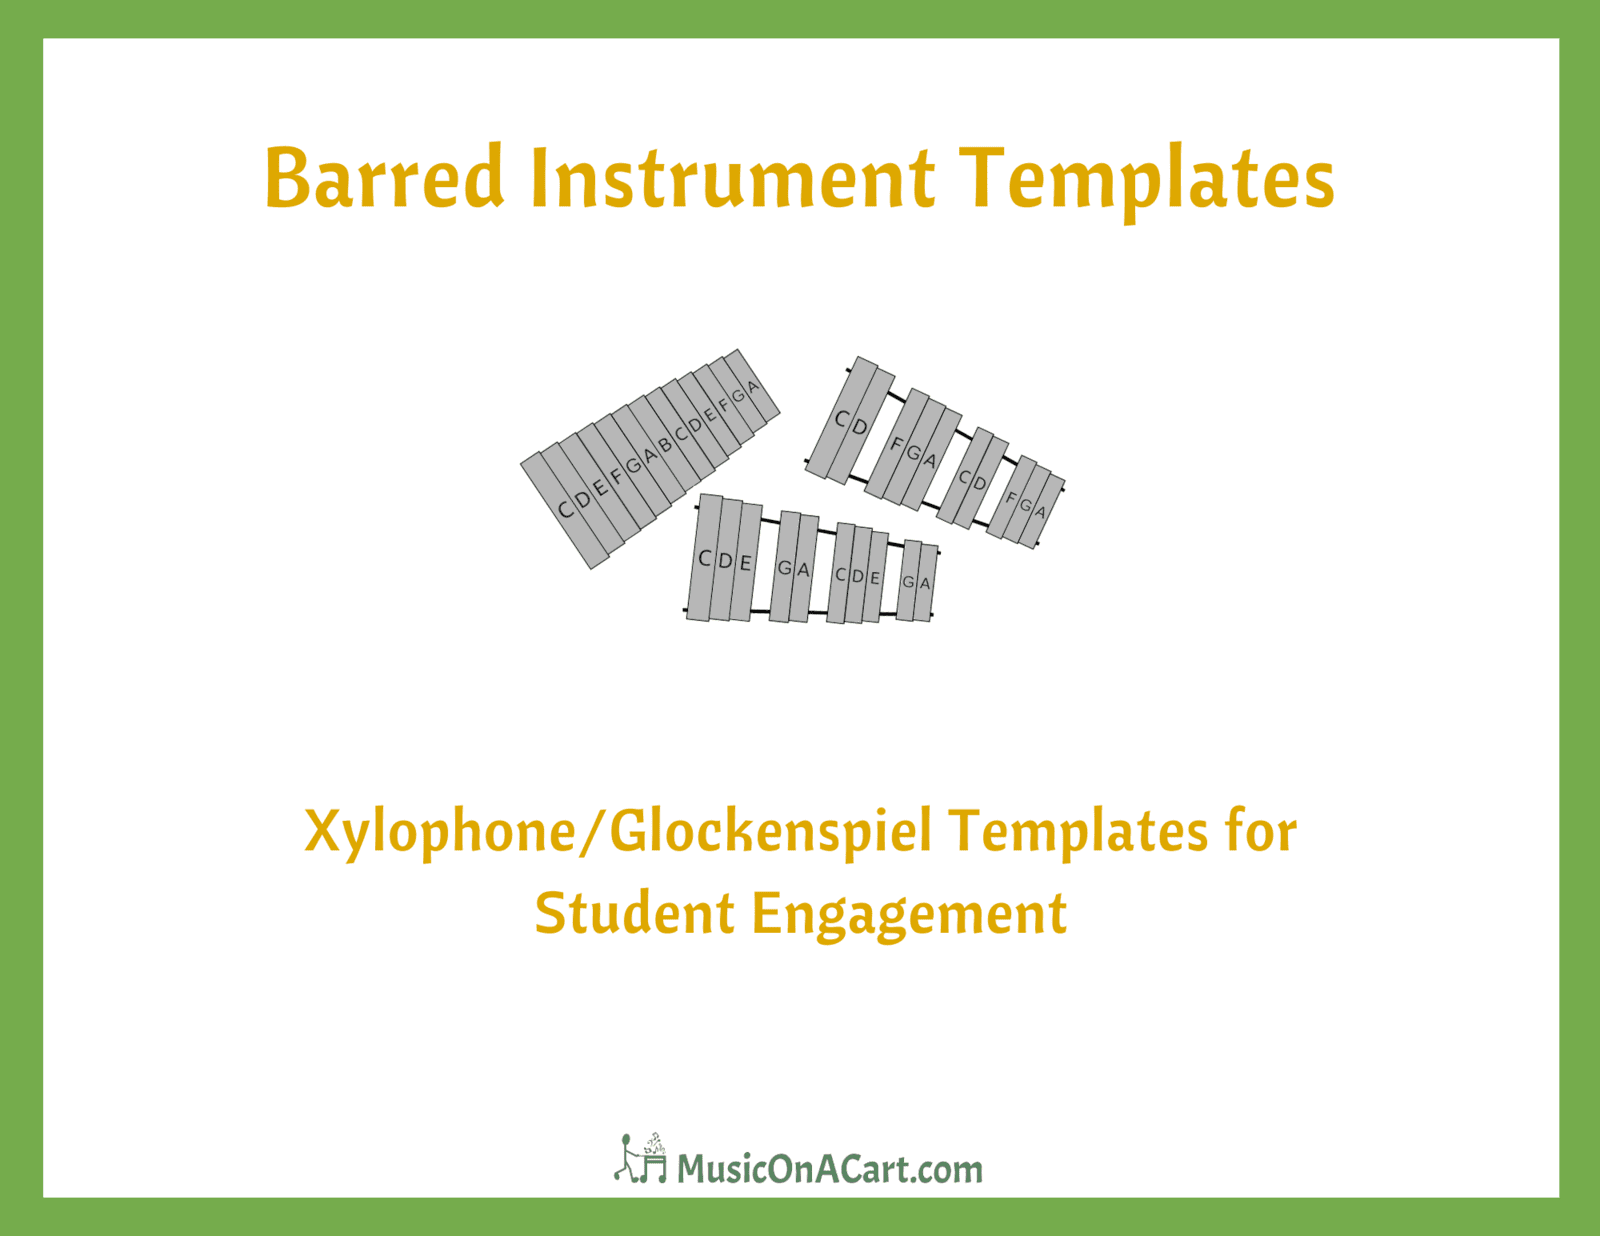 These barred instrument templates are great manipulatives for your music students to use, especially if you are teaching music from a cart. Download them for free at www.MusicOnACart.com